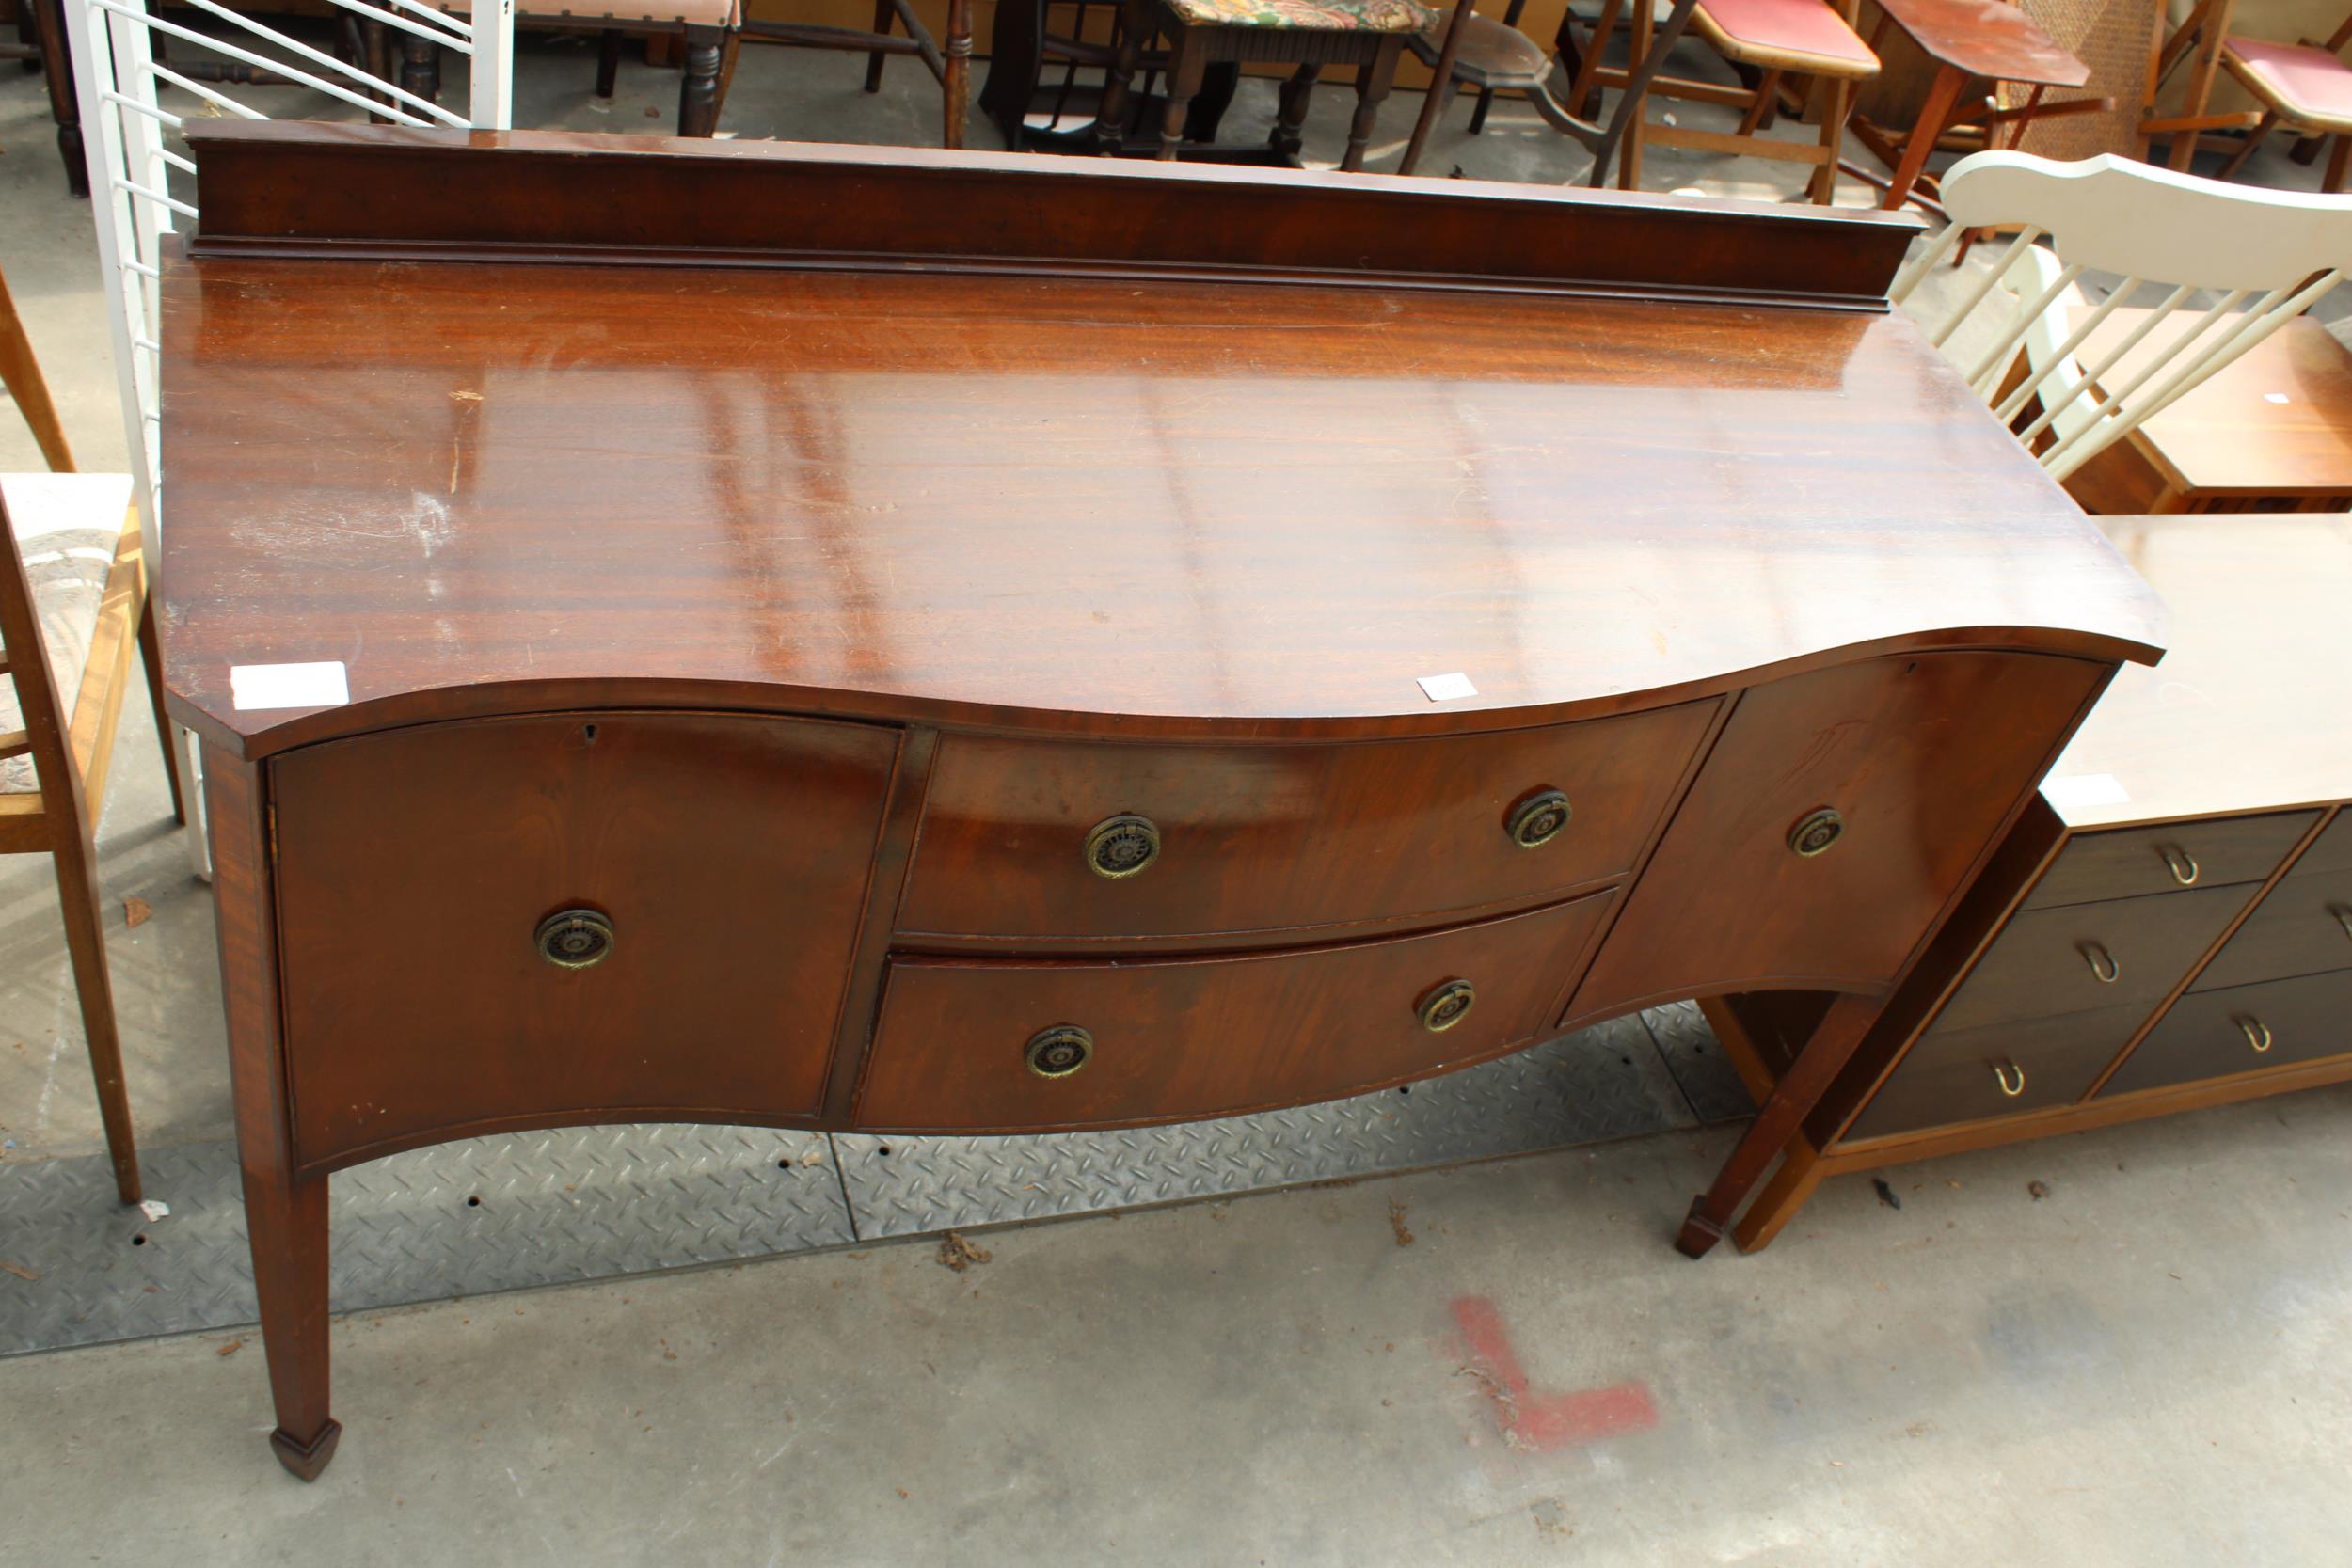 A REGENCY STYLE MAHOGANY WARING & GILLOW SERPENTINE SIDEBOARD ON TAPERING LEGS WITH SPADE FEET,